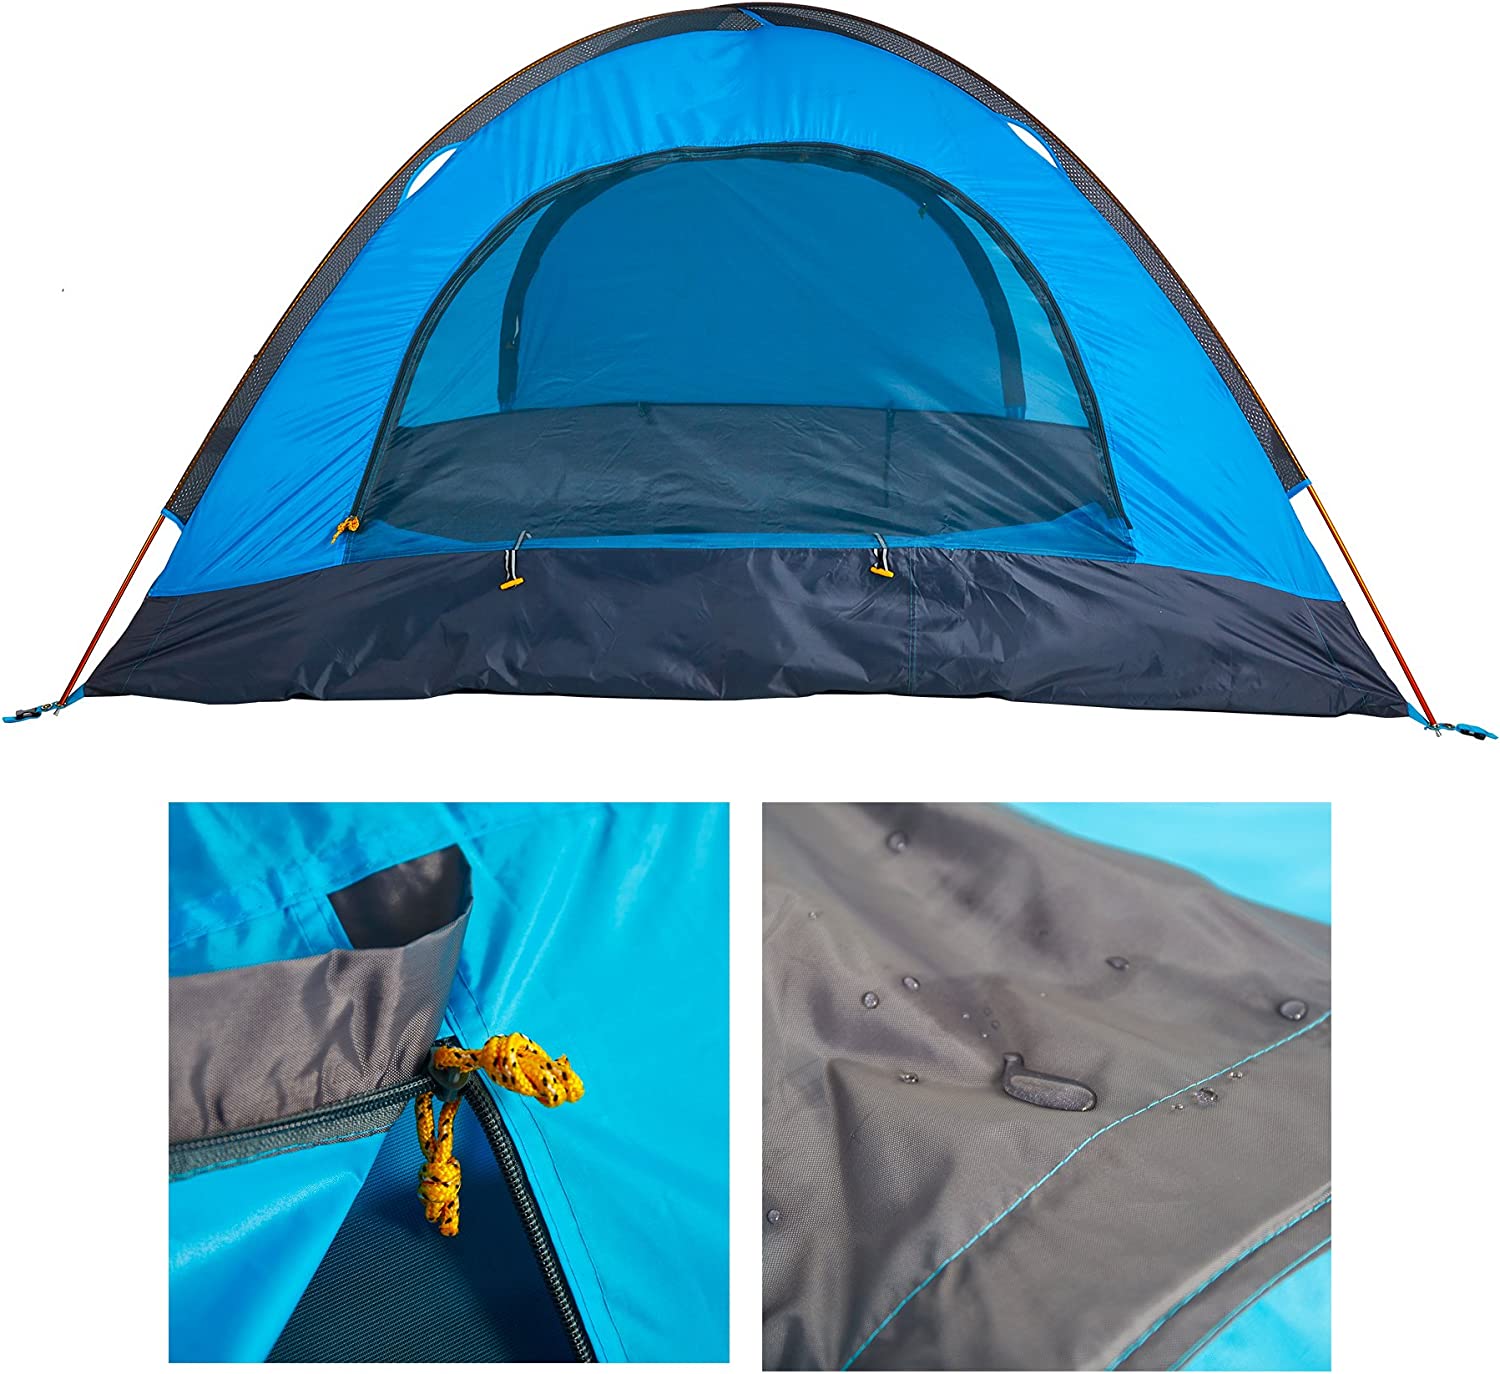 (Out of Stock) 2 Person Backpacking Tent, Lightweight for Camping Hiking with Carry Bag